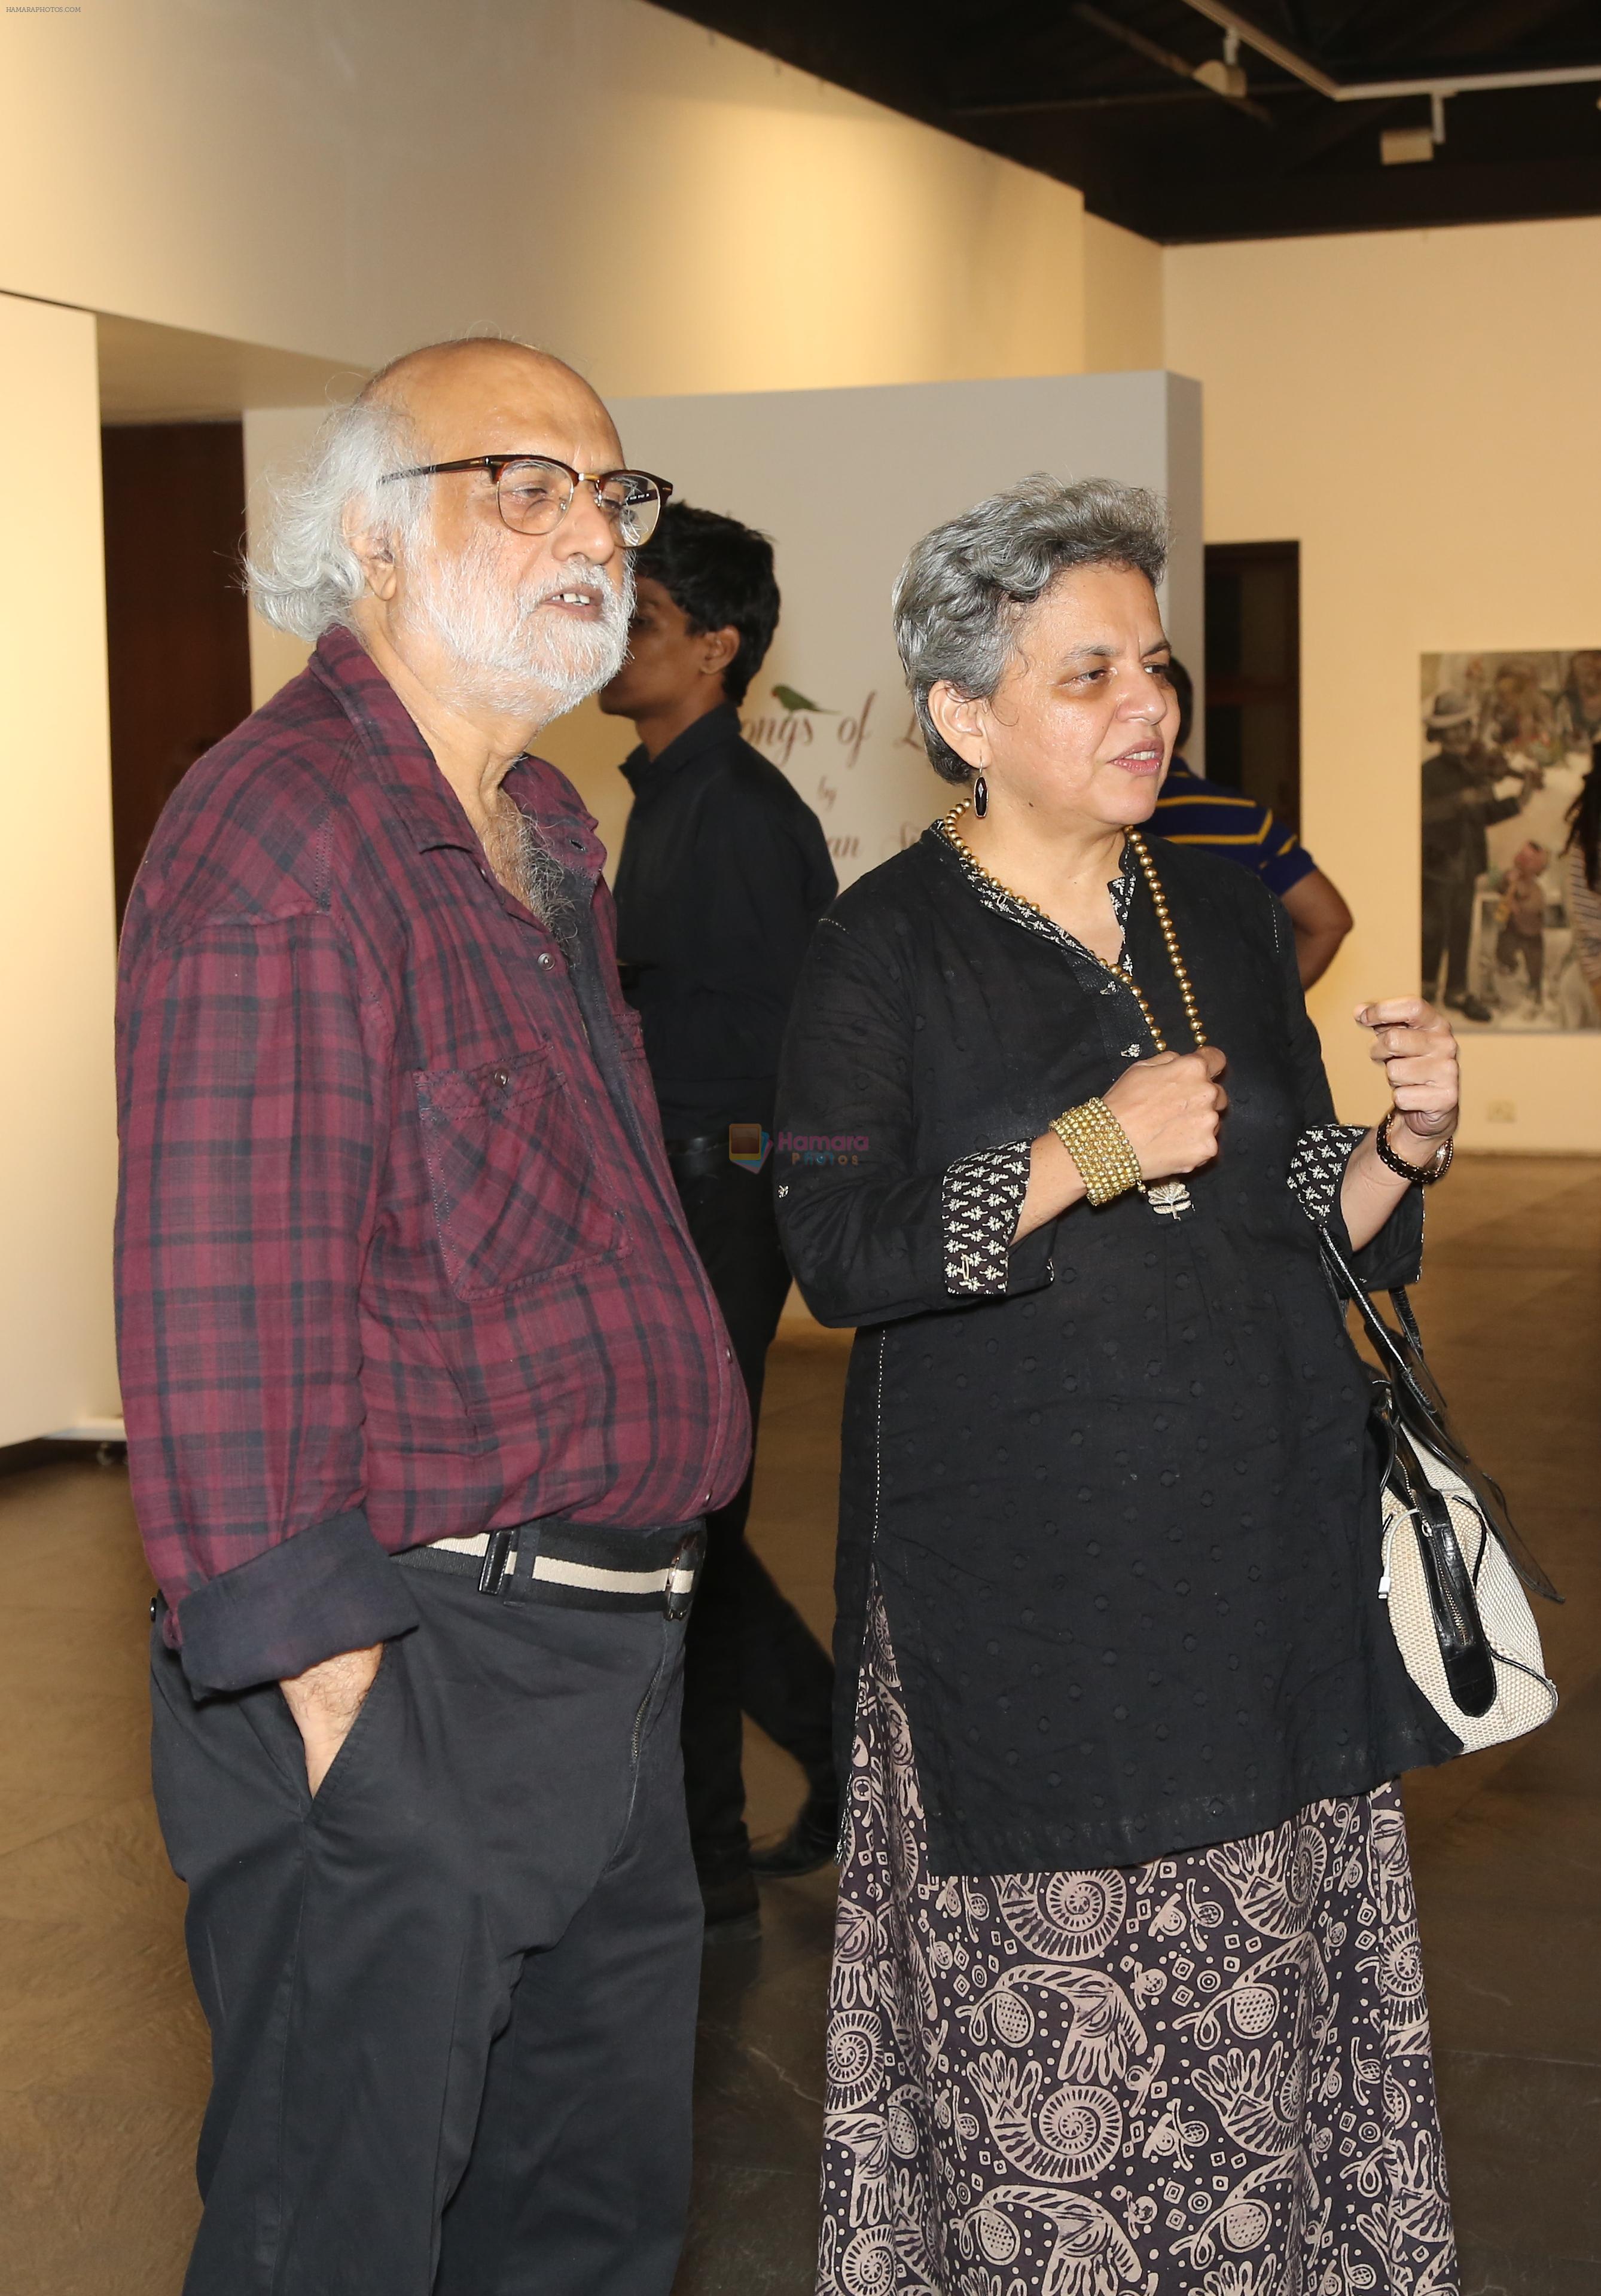 Brinda Miller and eminent Artist Gurucharan Singh inaugurated Song of Life unique Art Exhibition by eminent Artist Gurucharan Singh Other guest including Eminent Artist Brinda on 16th Oct 2015